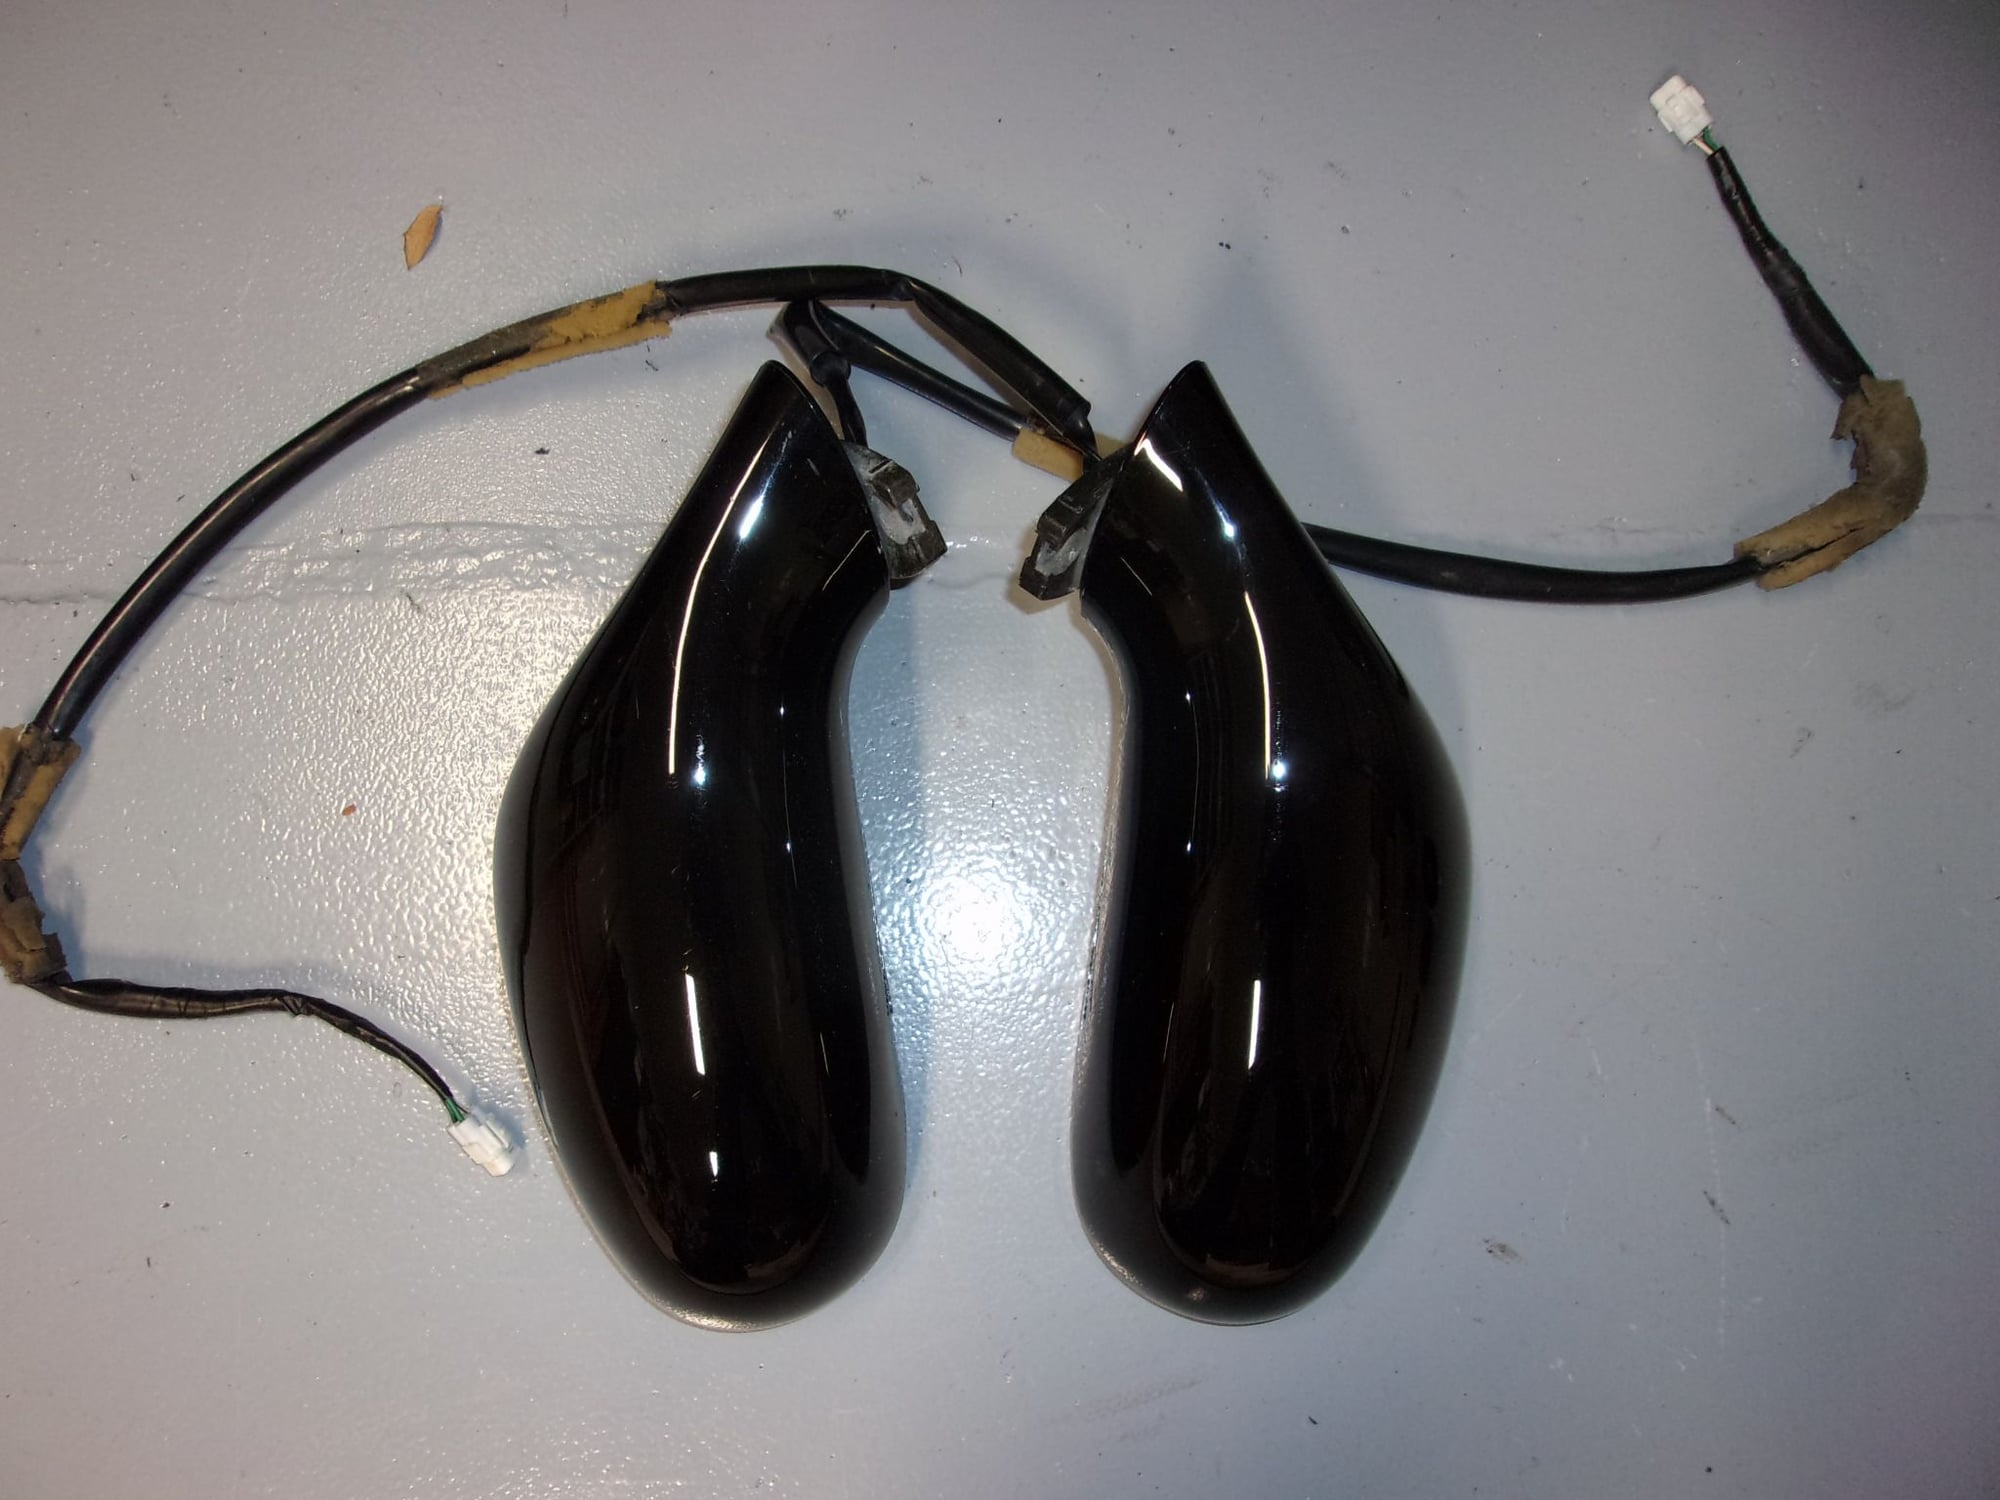 Exterior Body Parts - Mint OEM Side Mirror Set - Used - 1993 to 1995 Mazda RX-7 - Murfreesboro, TN 37130, United States